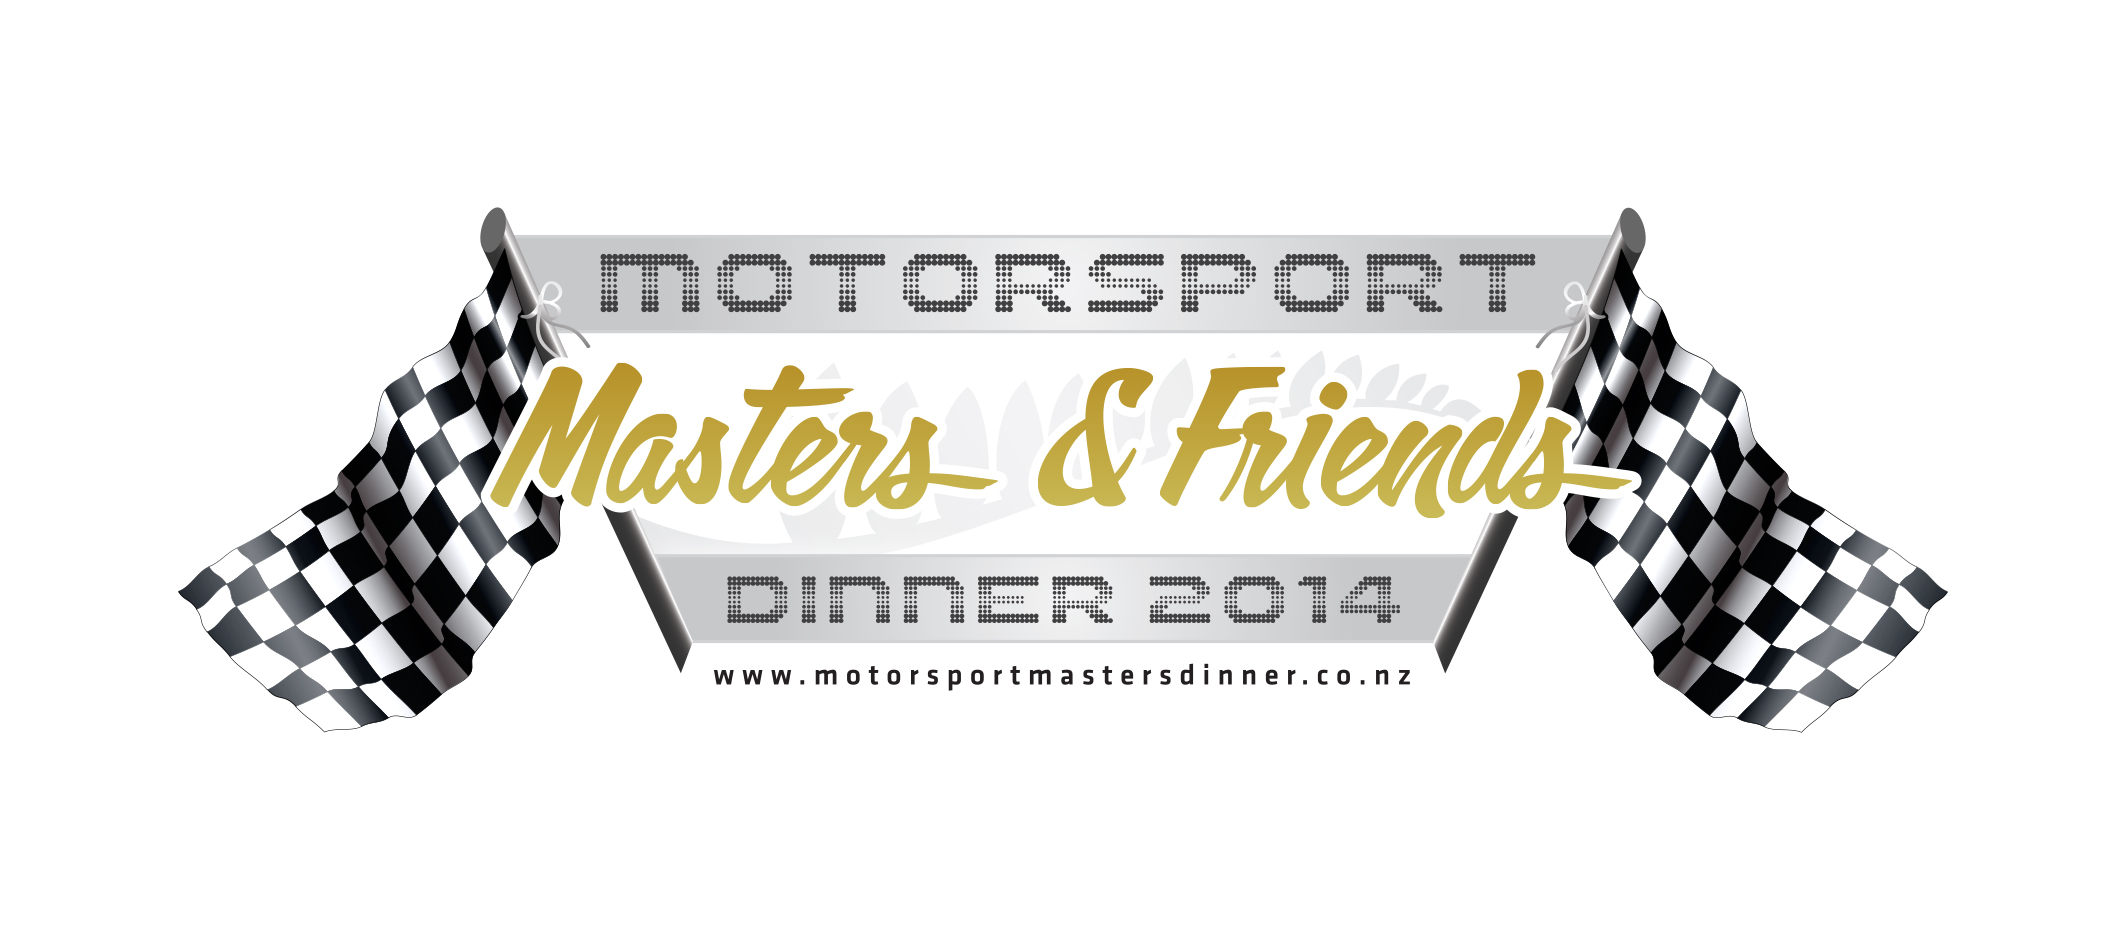 Organisers hope to make Motorsport Masters & Friends Dinner an annual event